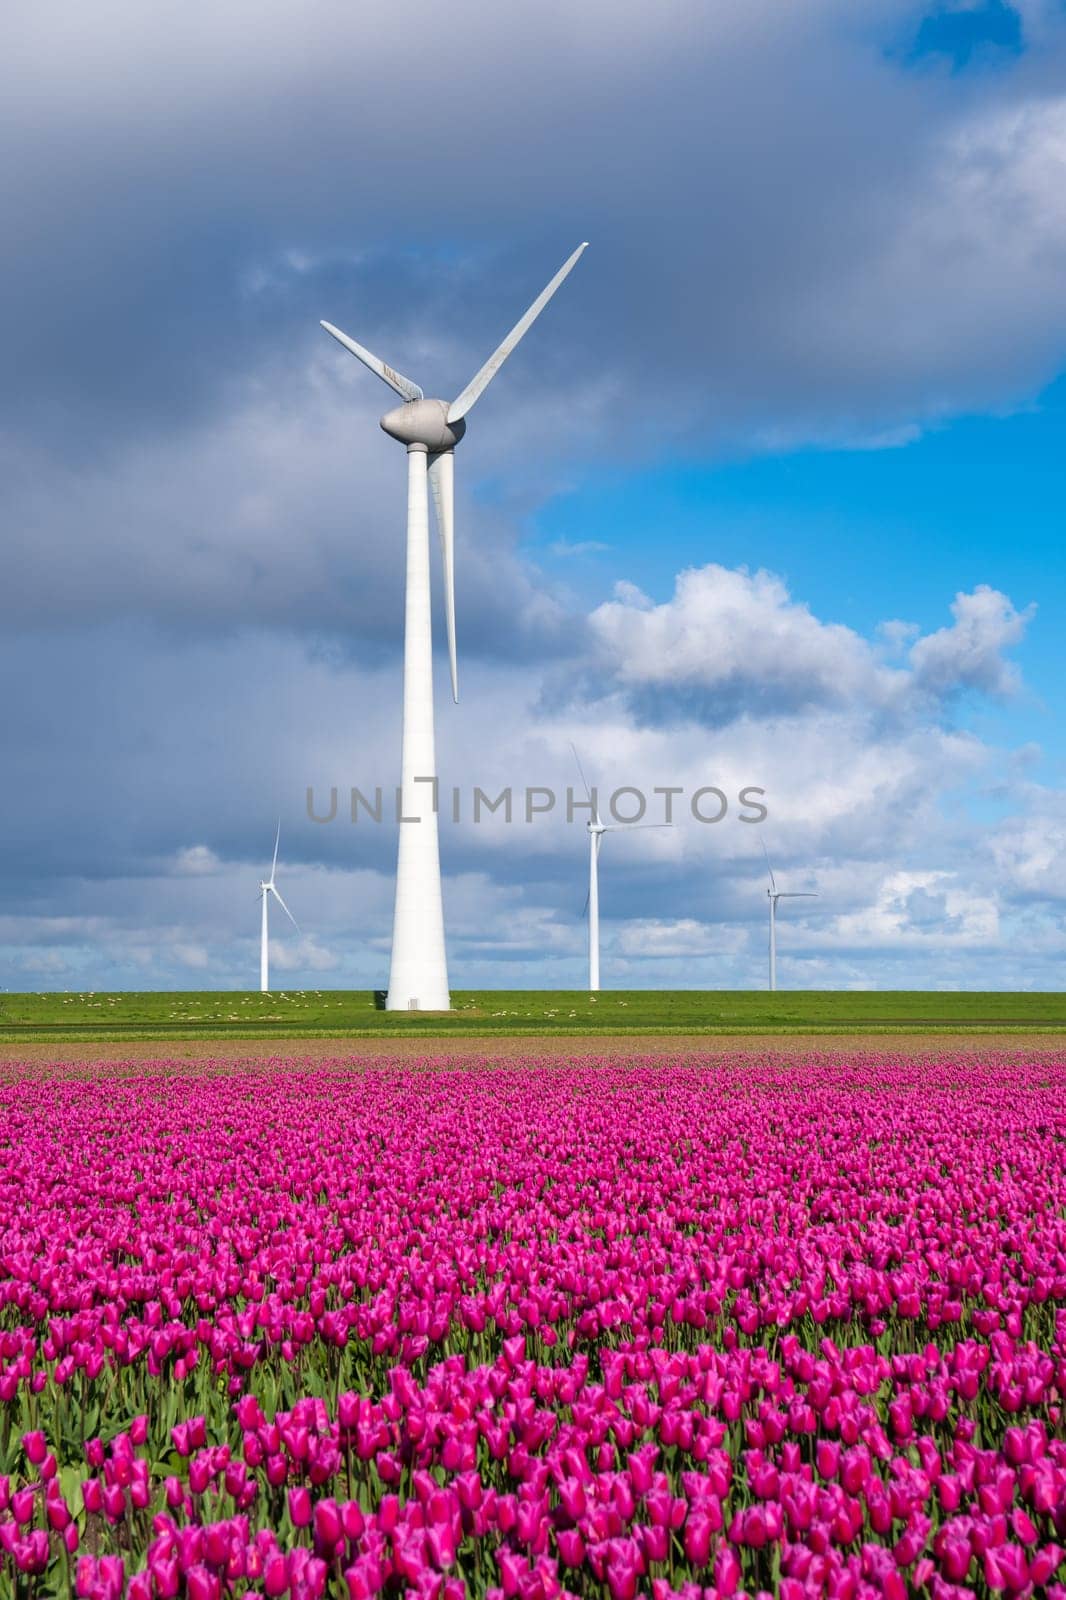 A vibrant field of purple tulips sways gracefully in the spring breeze, with a windmill turbine standing tall in the background in the Noordoostpolder Netherlands